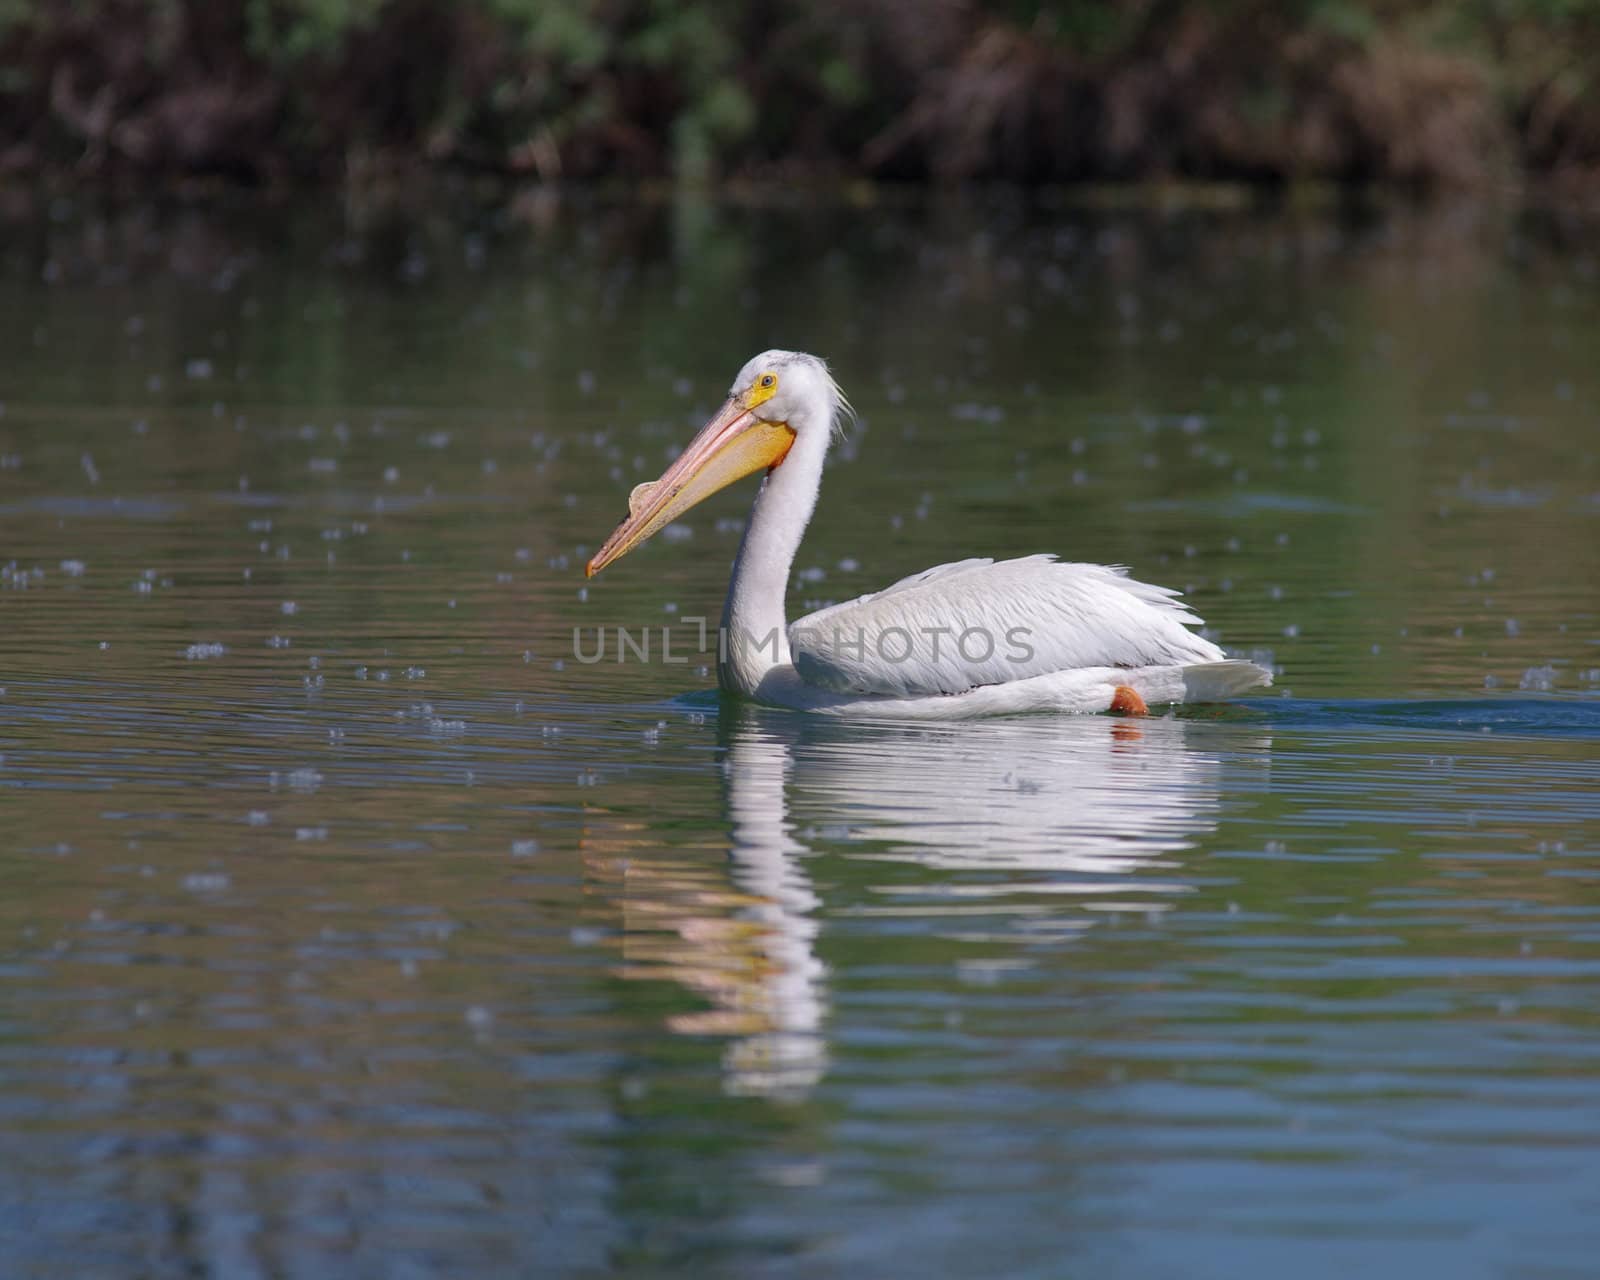 A Pelican in a Colorado lake suimming during the summer